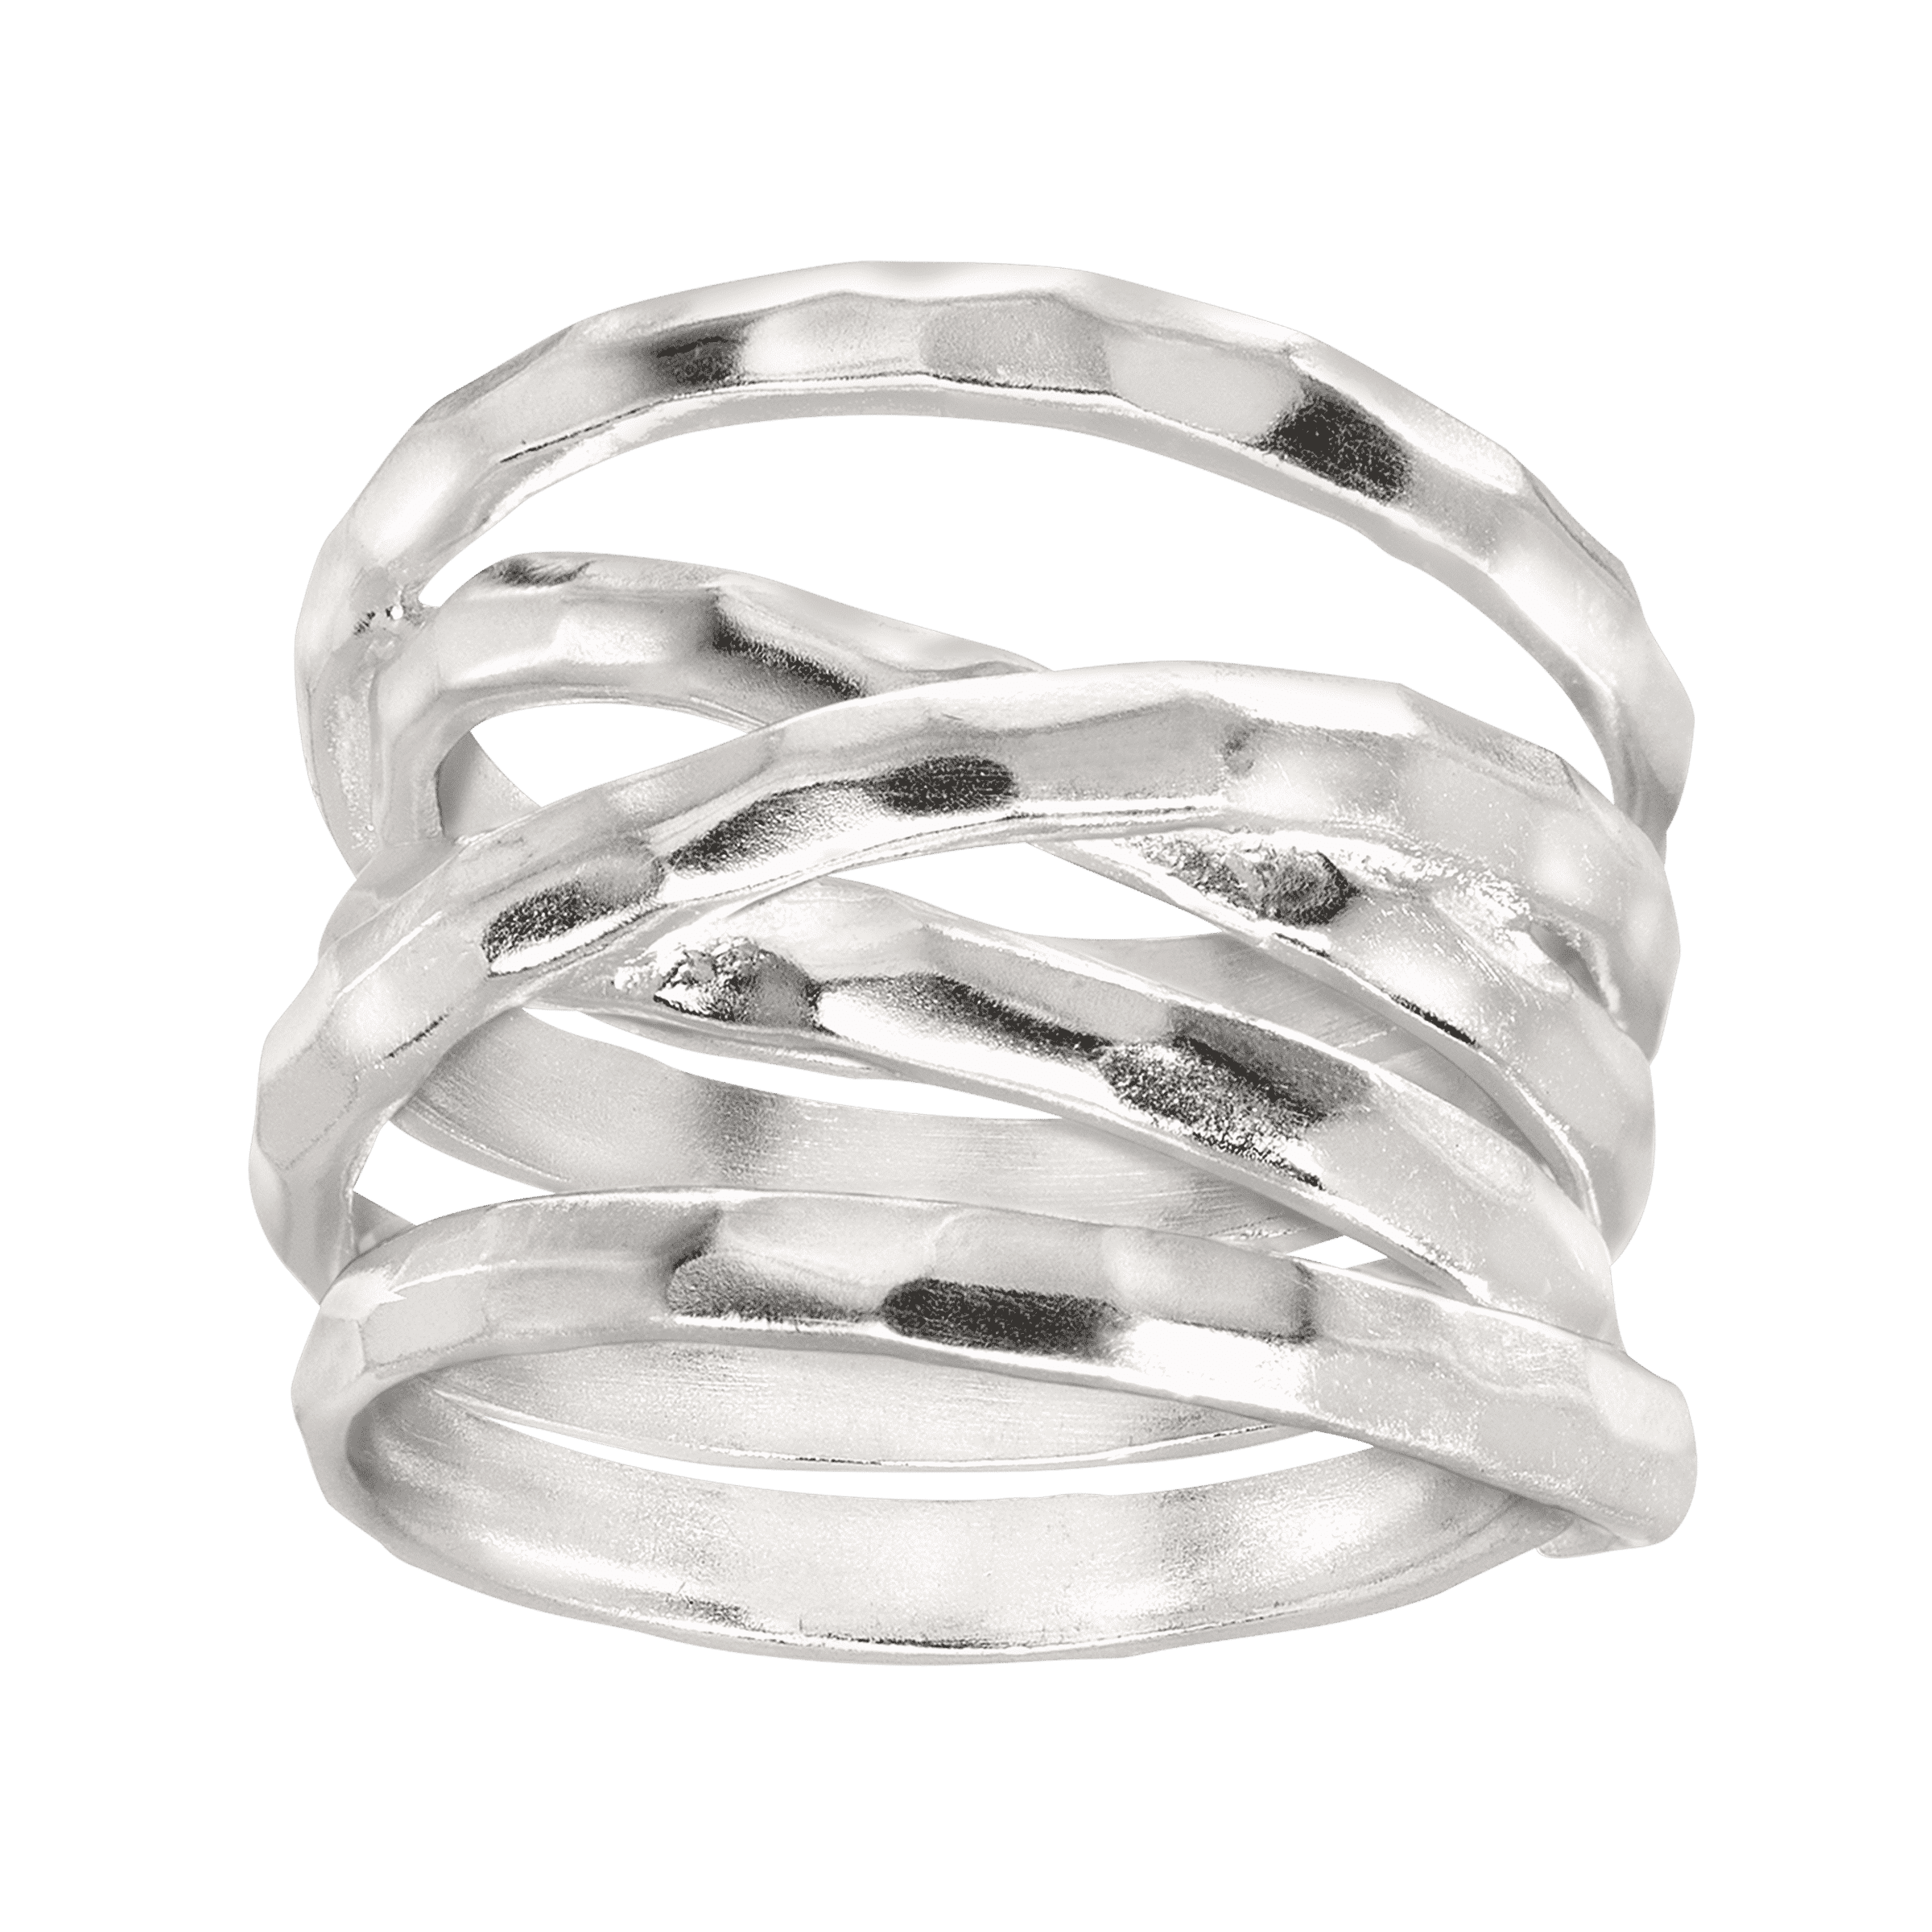 Wrapped Up Ring, White